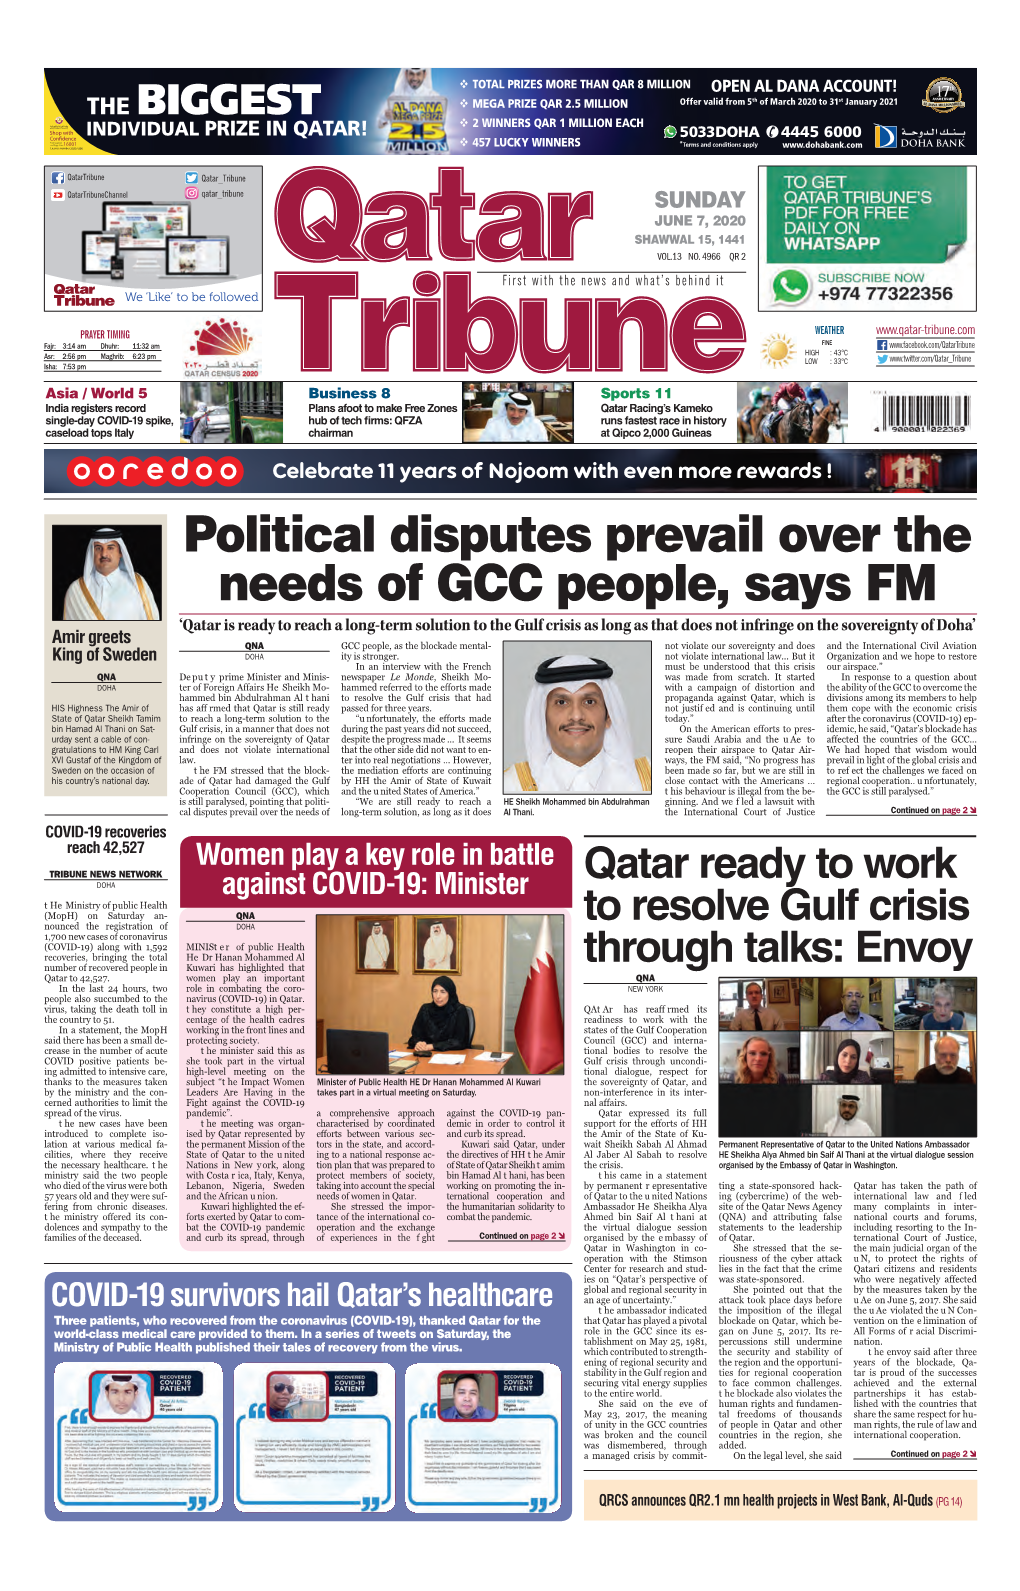 Political Disputes Prevail Over the Needs of GCC People, Says FM